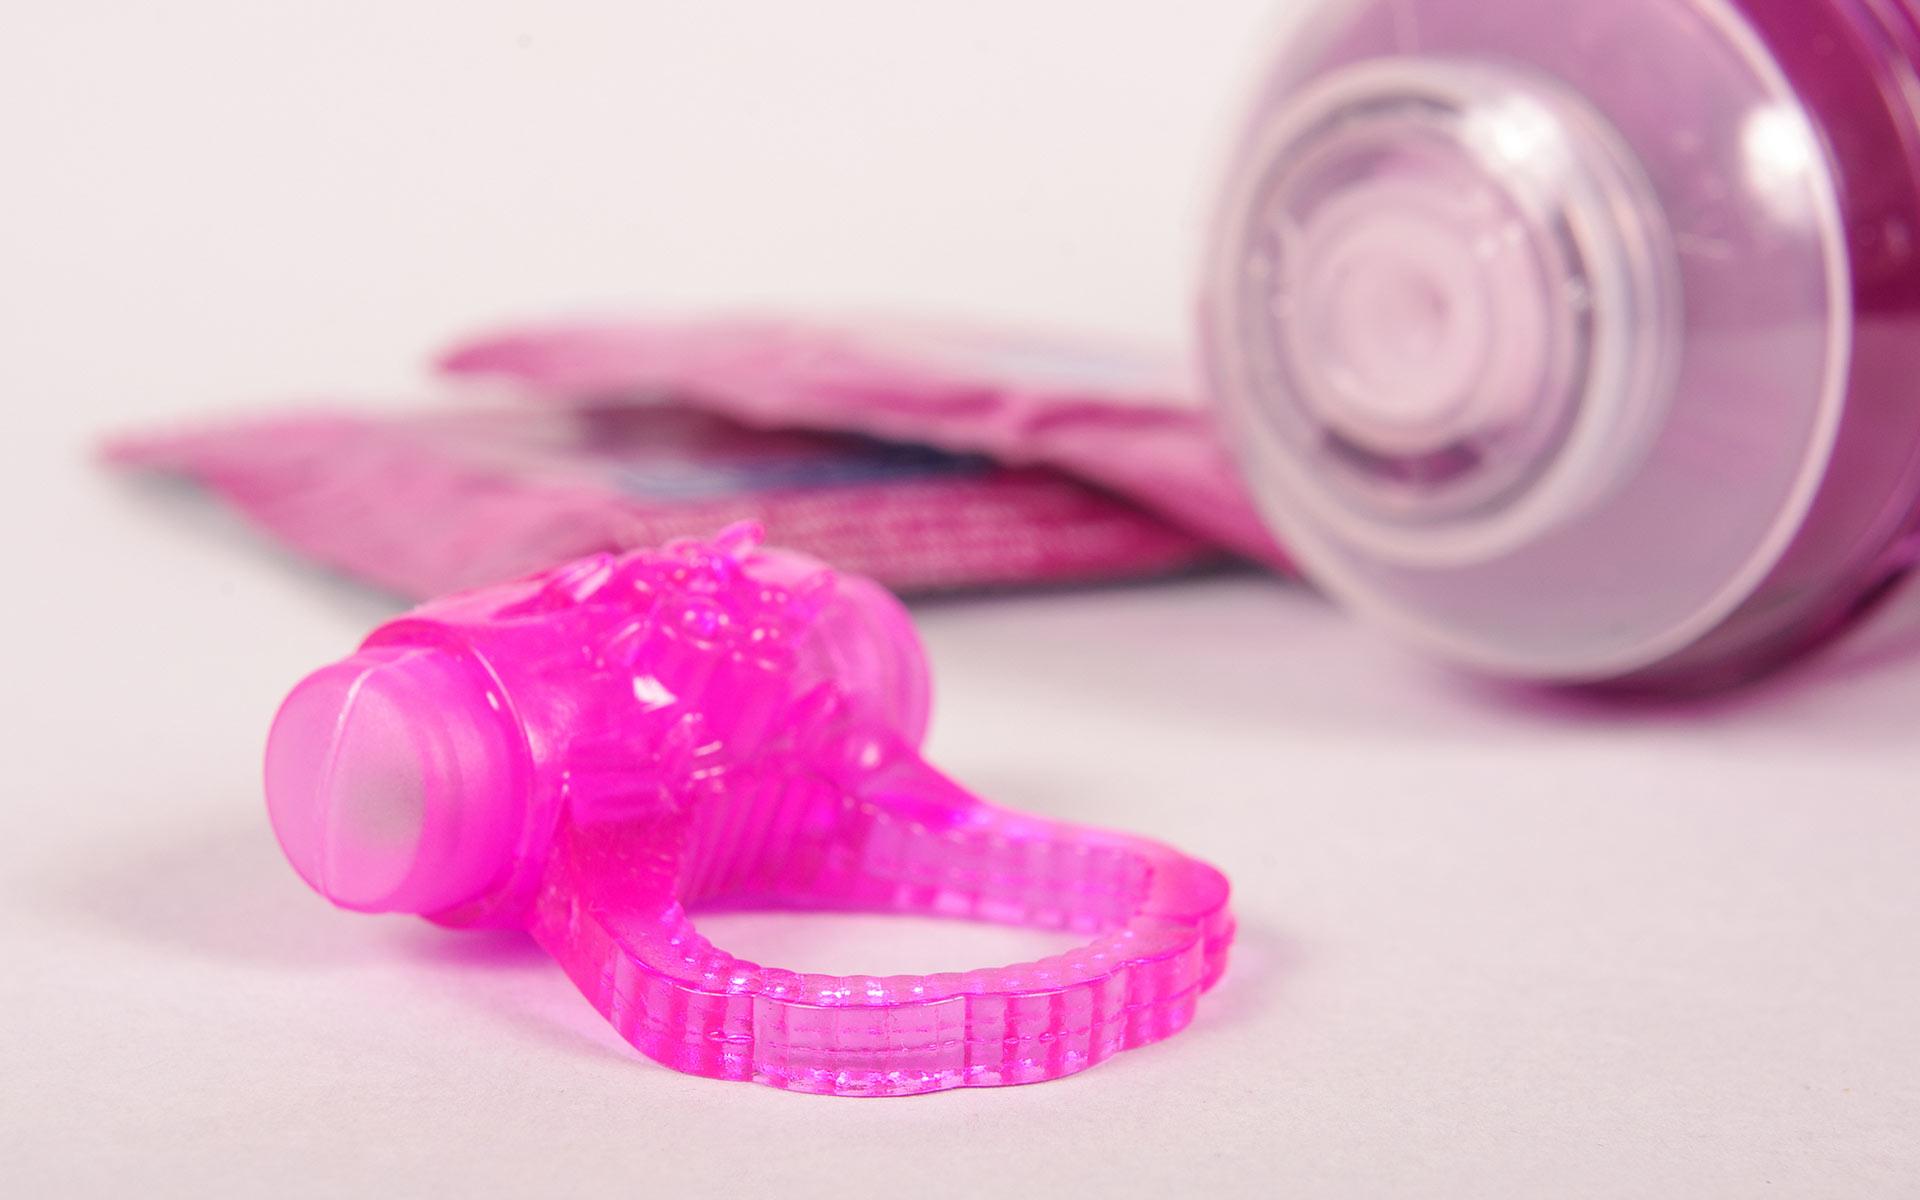 Bright pink cock ring on the ground next to two condoms and a pink tube of lube.